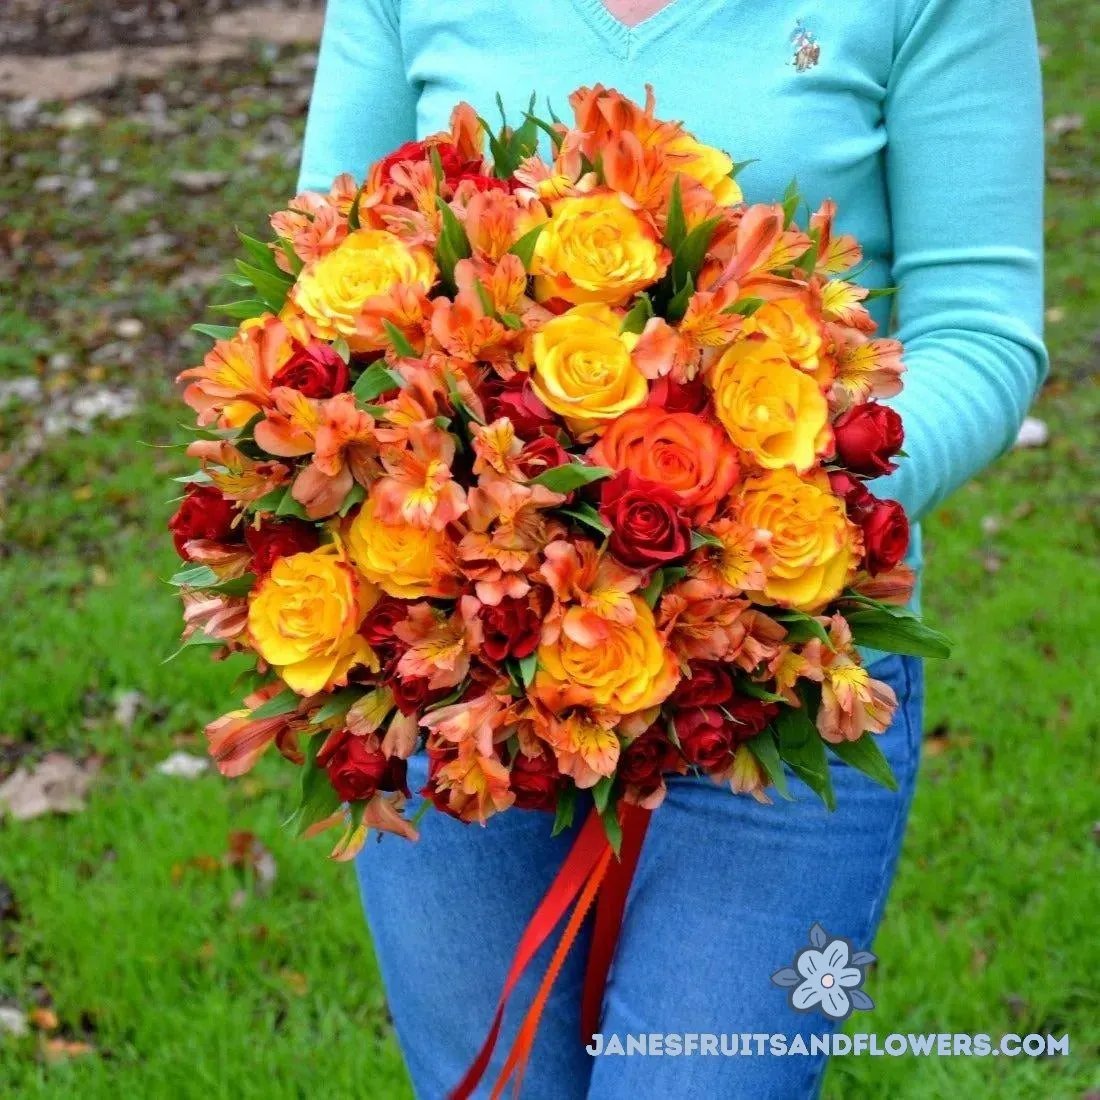 Paradise Sunset Bouquet - Jane's Fruits And Flowers